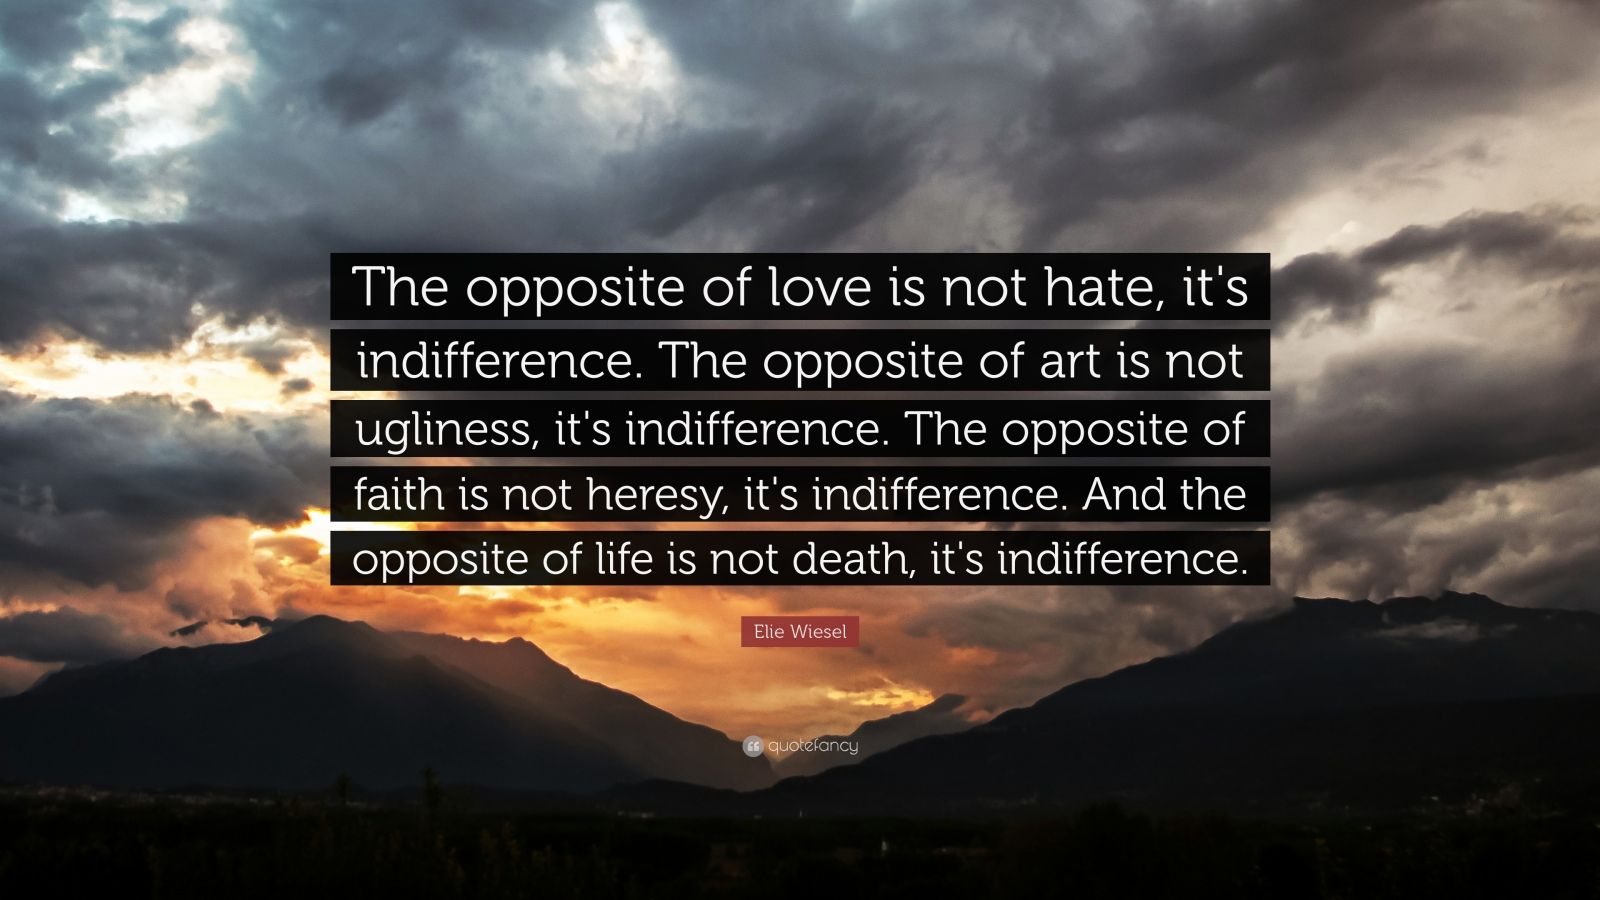 Elie Wiesel Quote “The opposite of love is not hate, it's